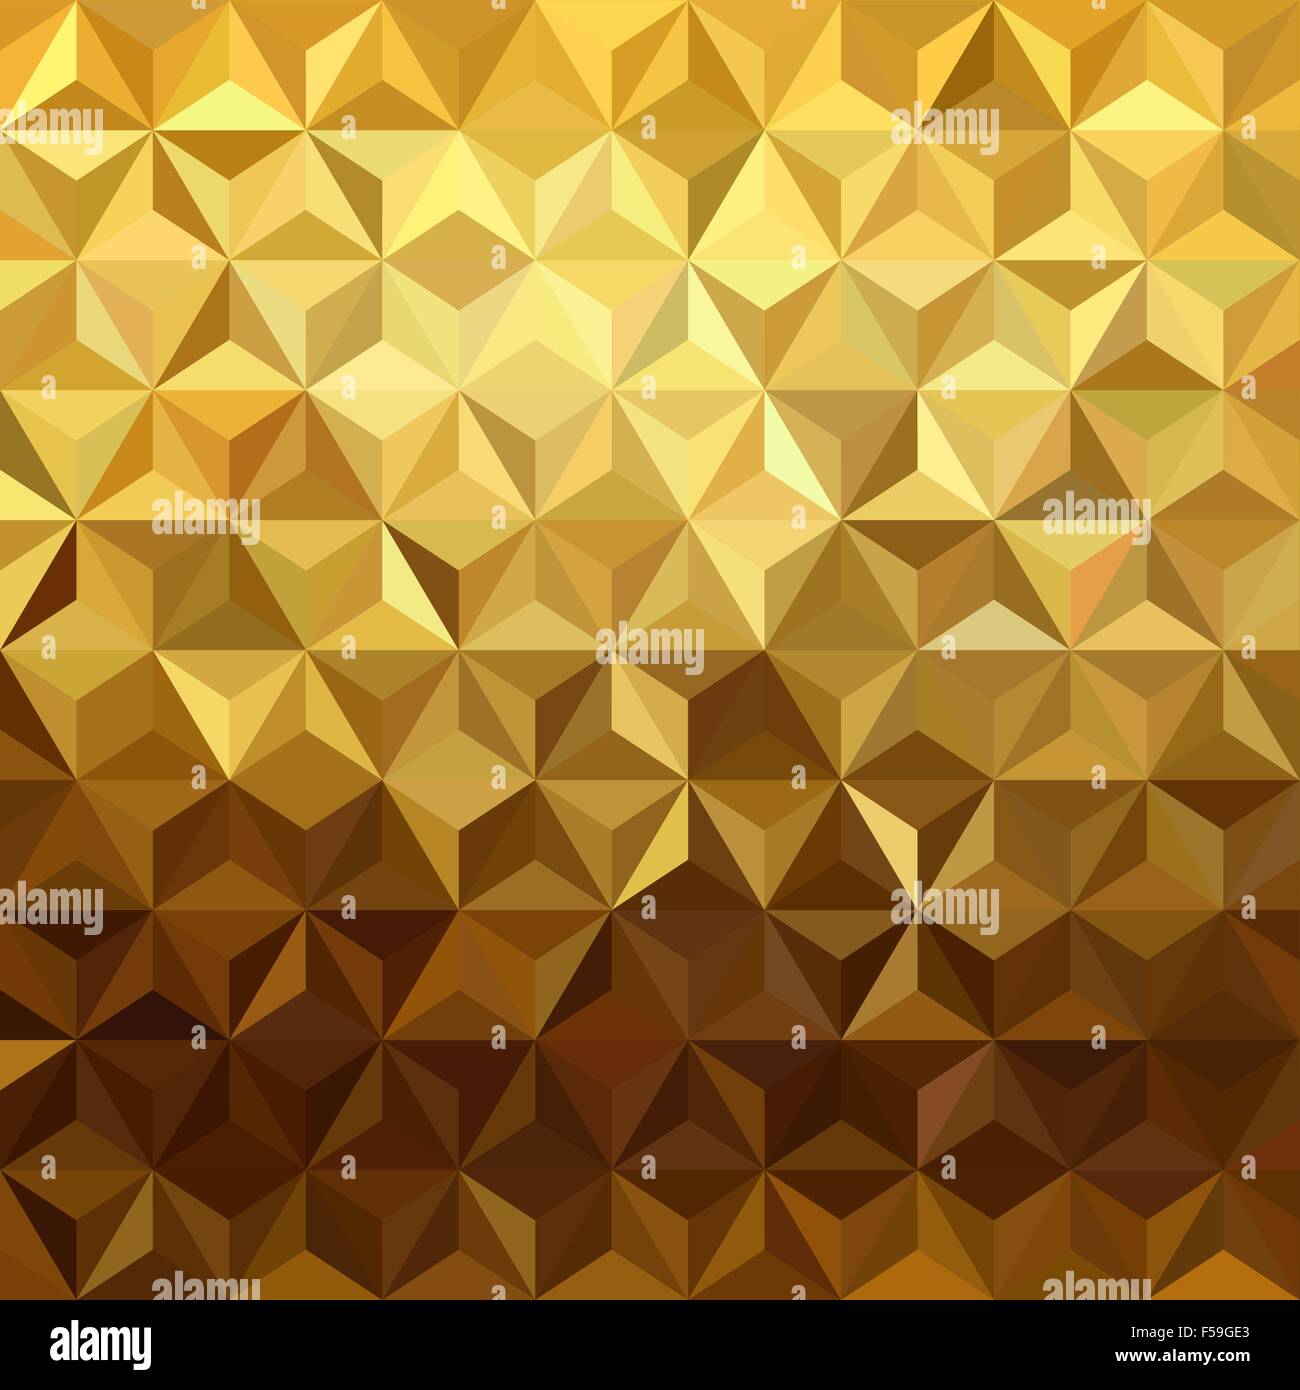 Fancy golden seamless pattern in low polygon 3d design. Ideal for web background, print, or greeting card. EPS10 vector. Stock Vector